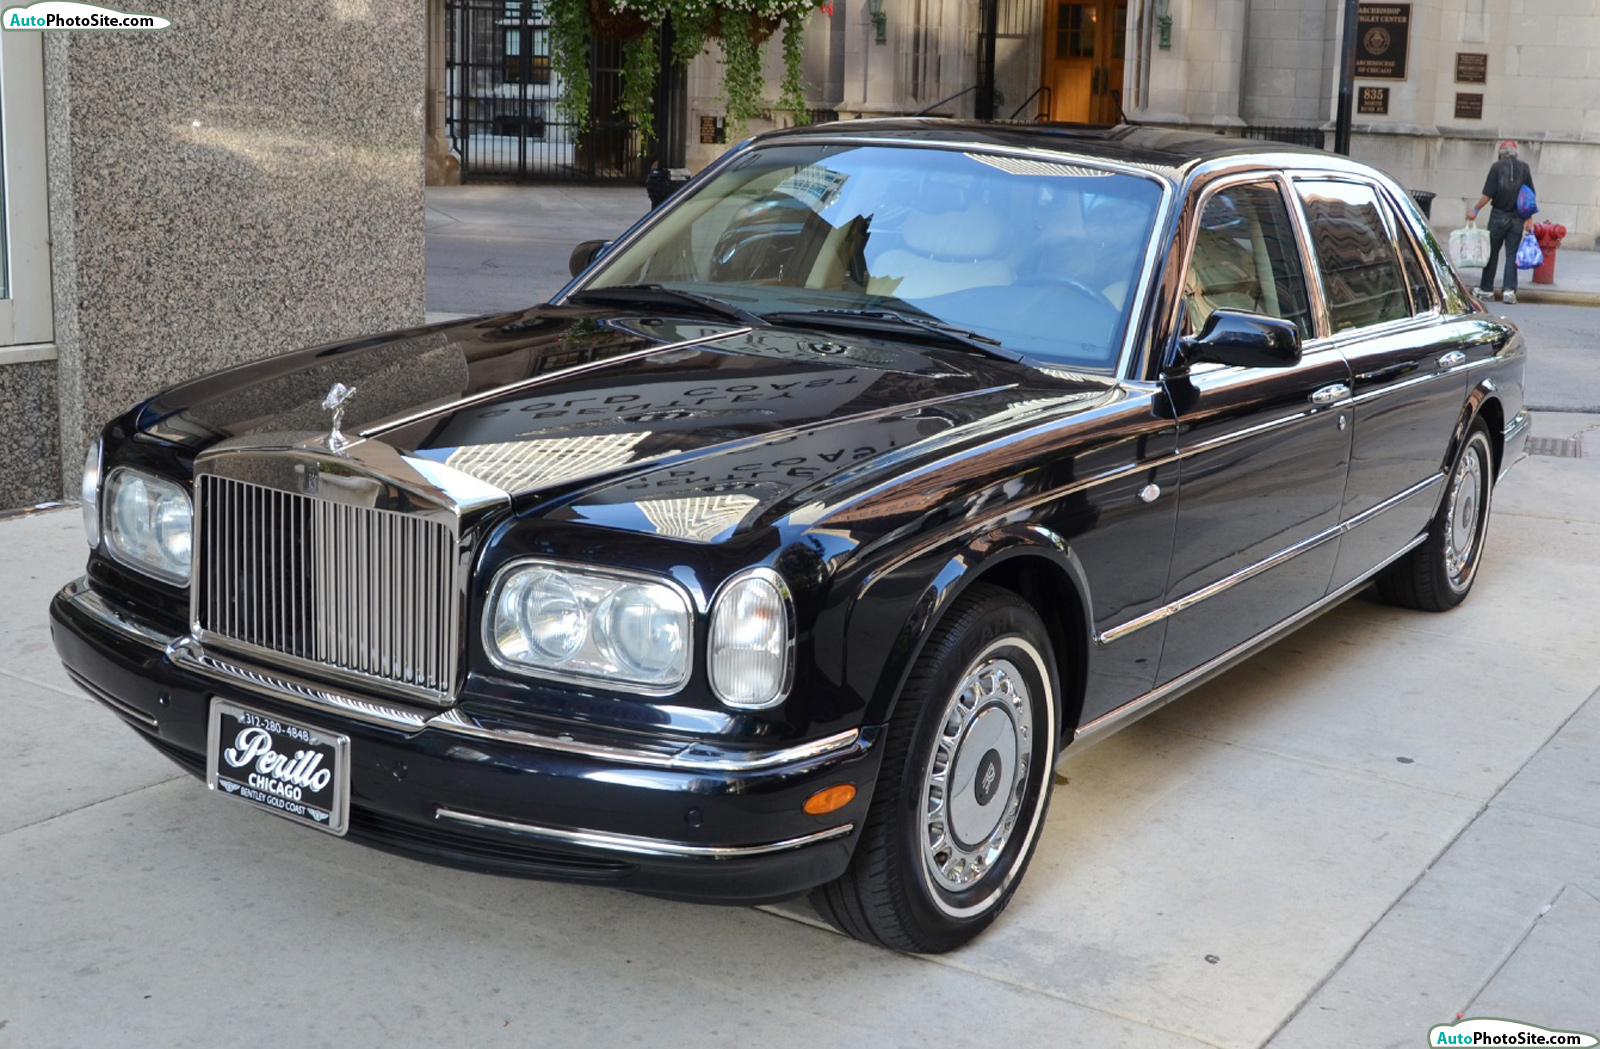 Used 2001 RollsRoyce Silver Seraph for Sale with Photos  CarGurus